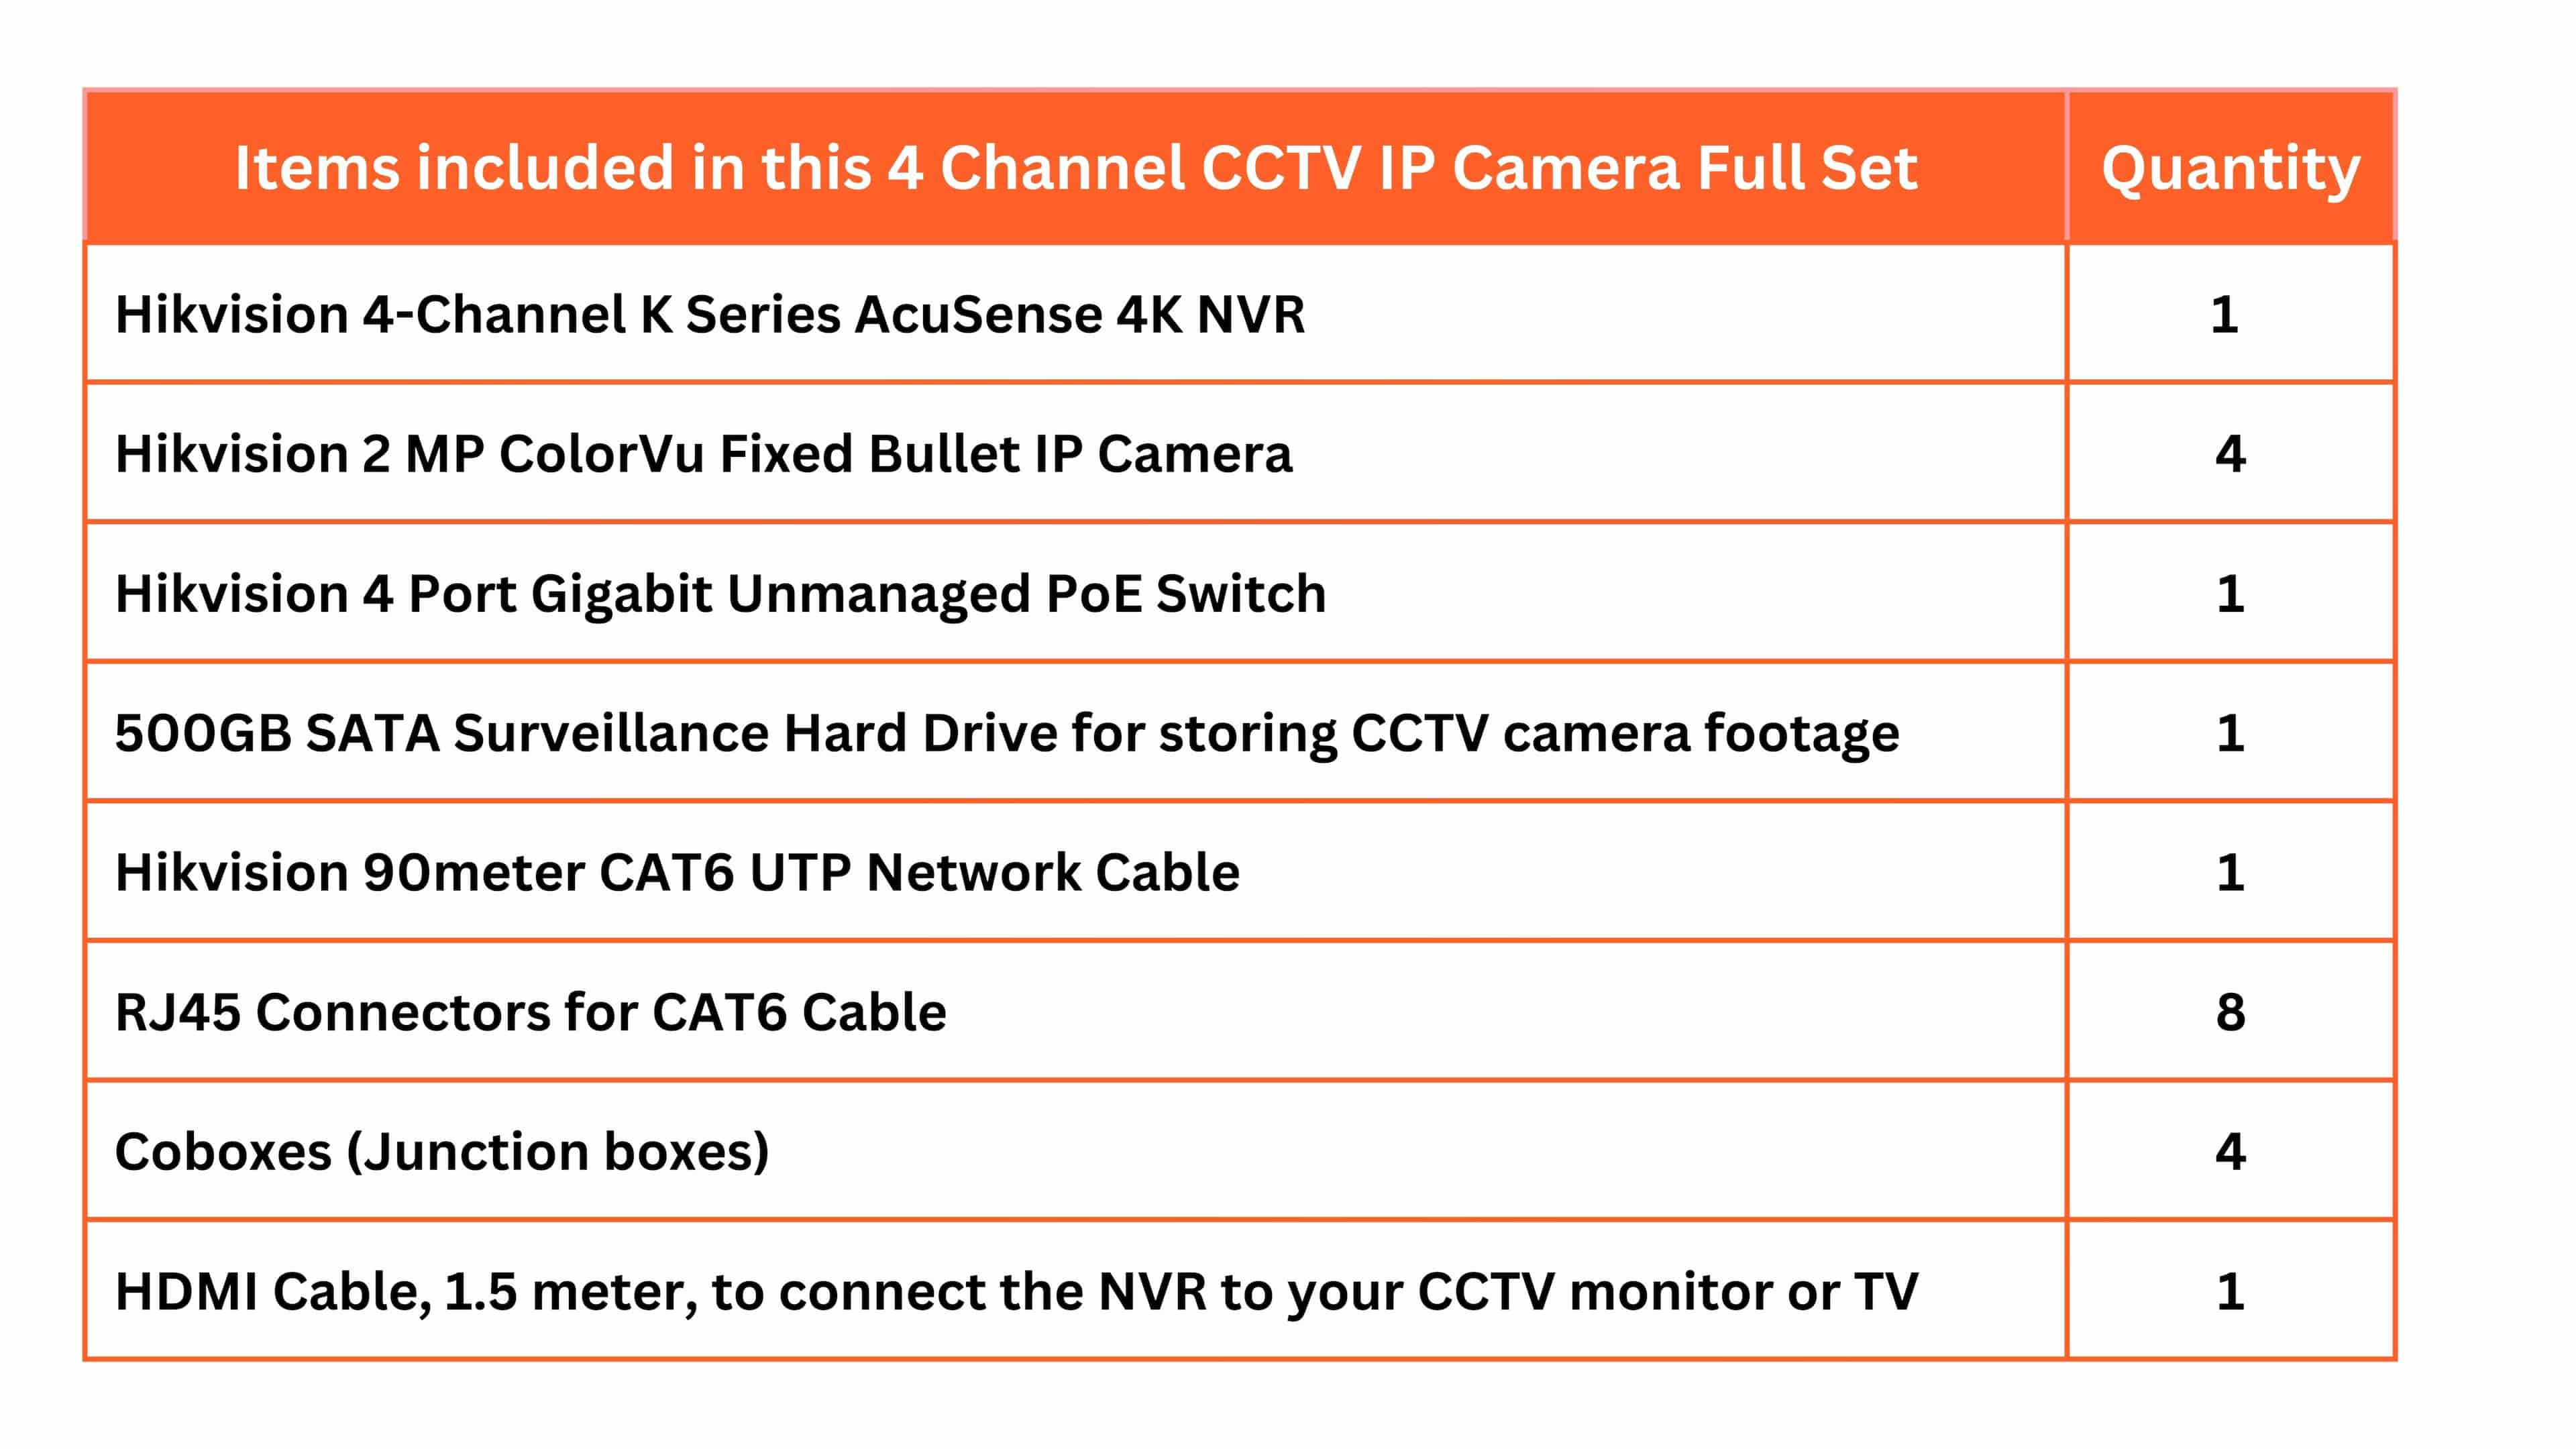 HIKVISION 4 CCTV IP Camera Full Set with 4 Channel 4K NVR, 4 × 2MP ColorVu IP Camera, 4 Port PoE Switch, 500GB HDD, RJ45, Cobox, Cat6 90m & HDMI Cable